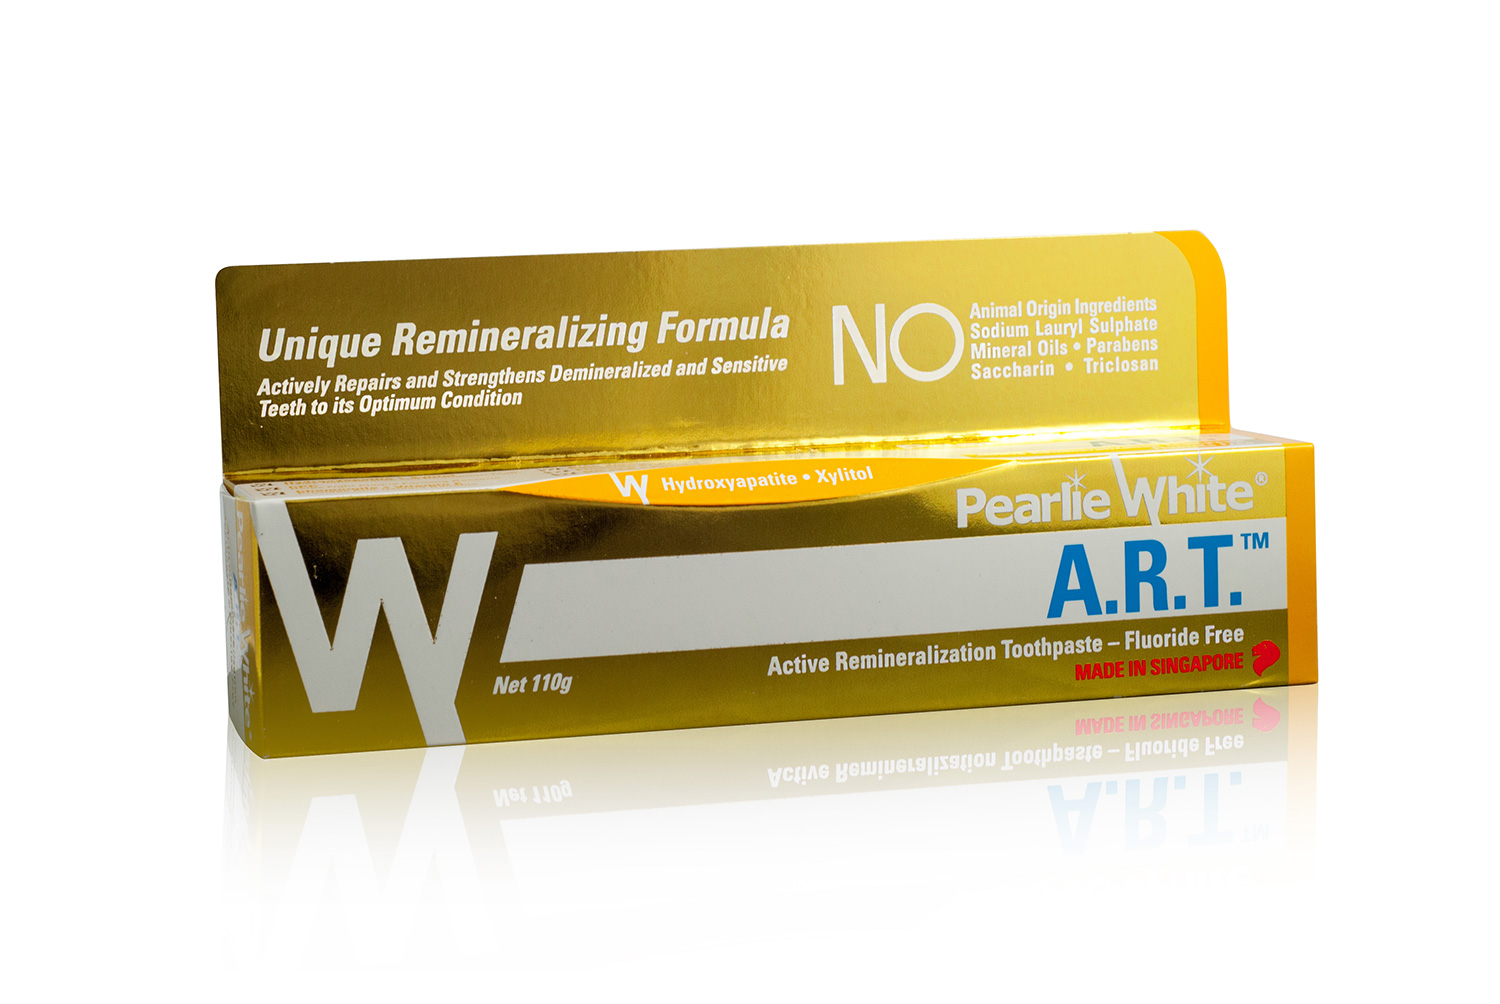 Pearlie-White_A.R.T_Active-Remineralization-Toothpaste-(credit-to-Pearlie-White)-(3)